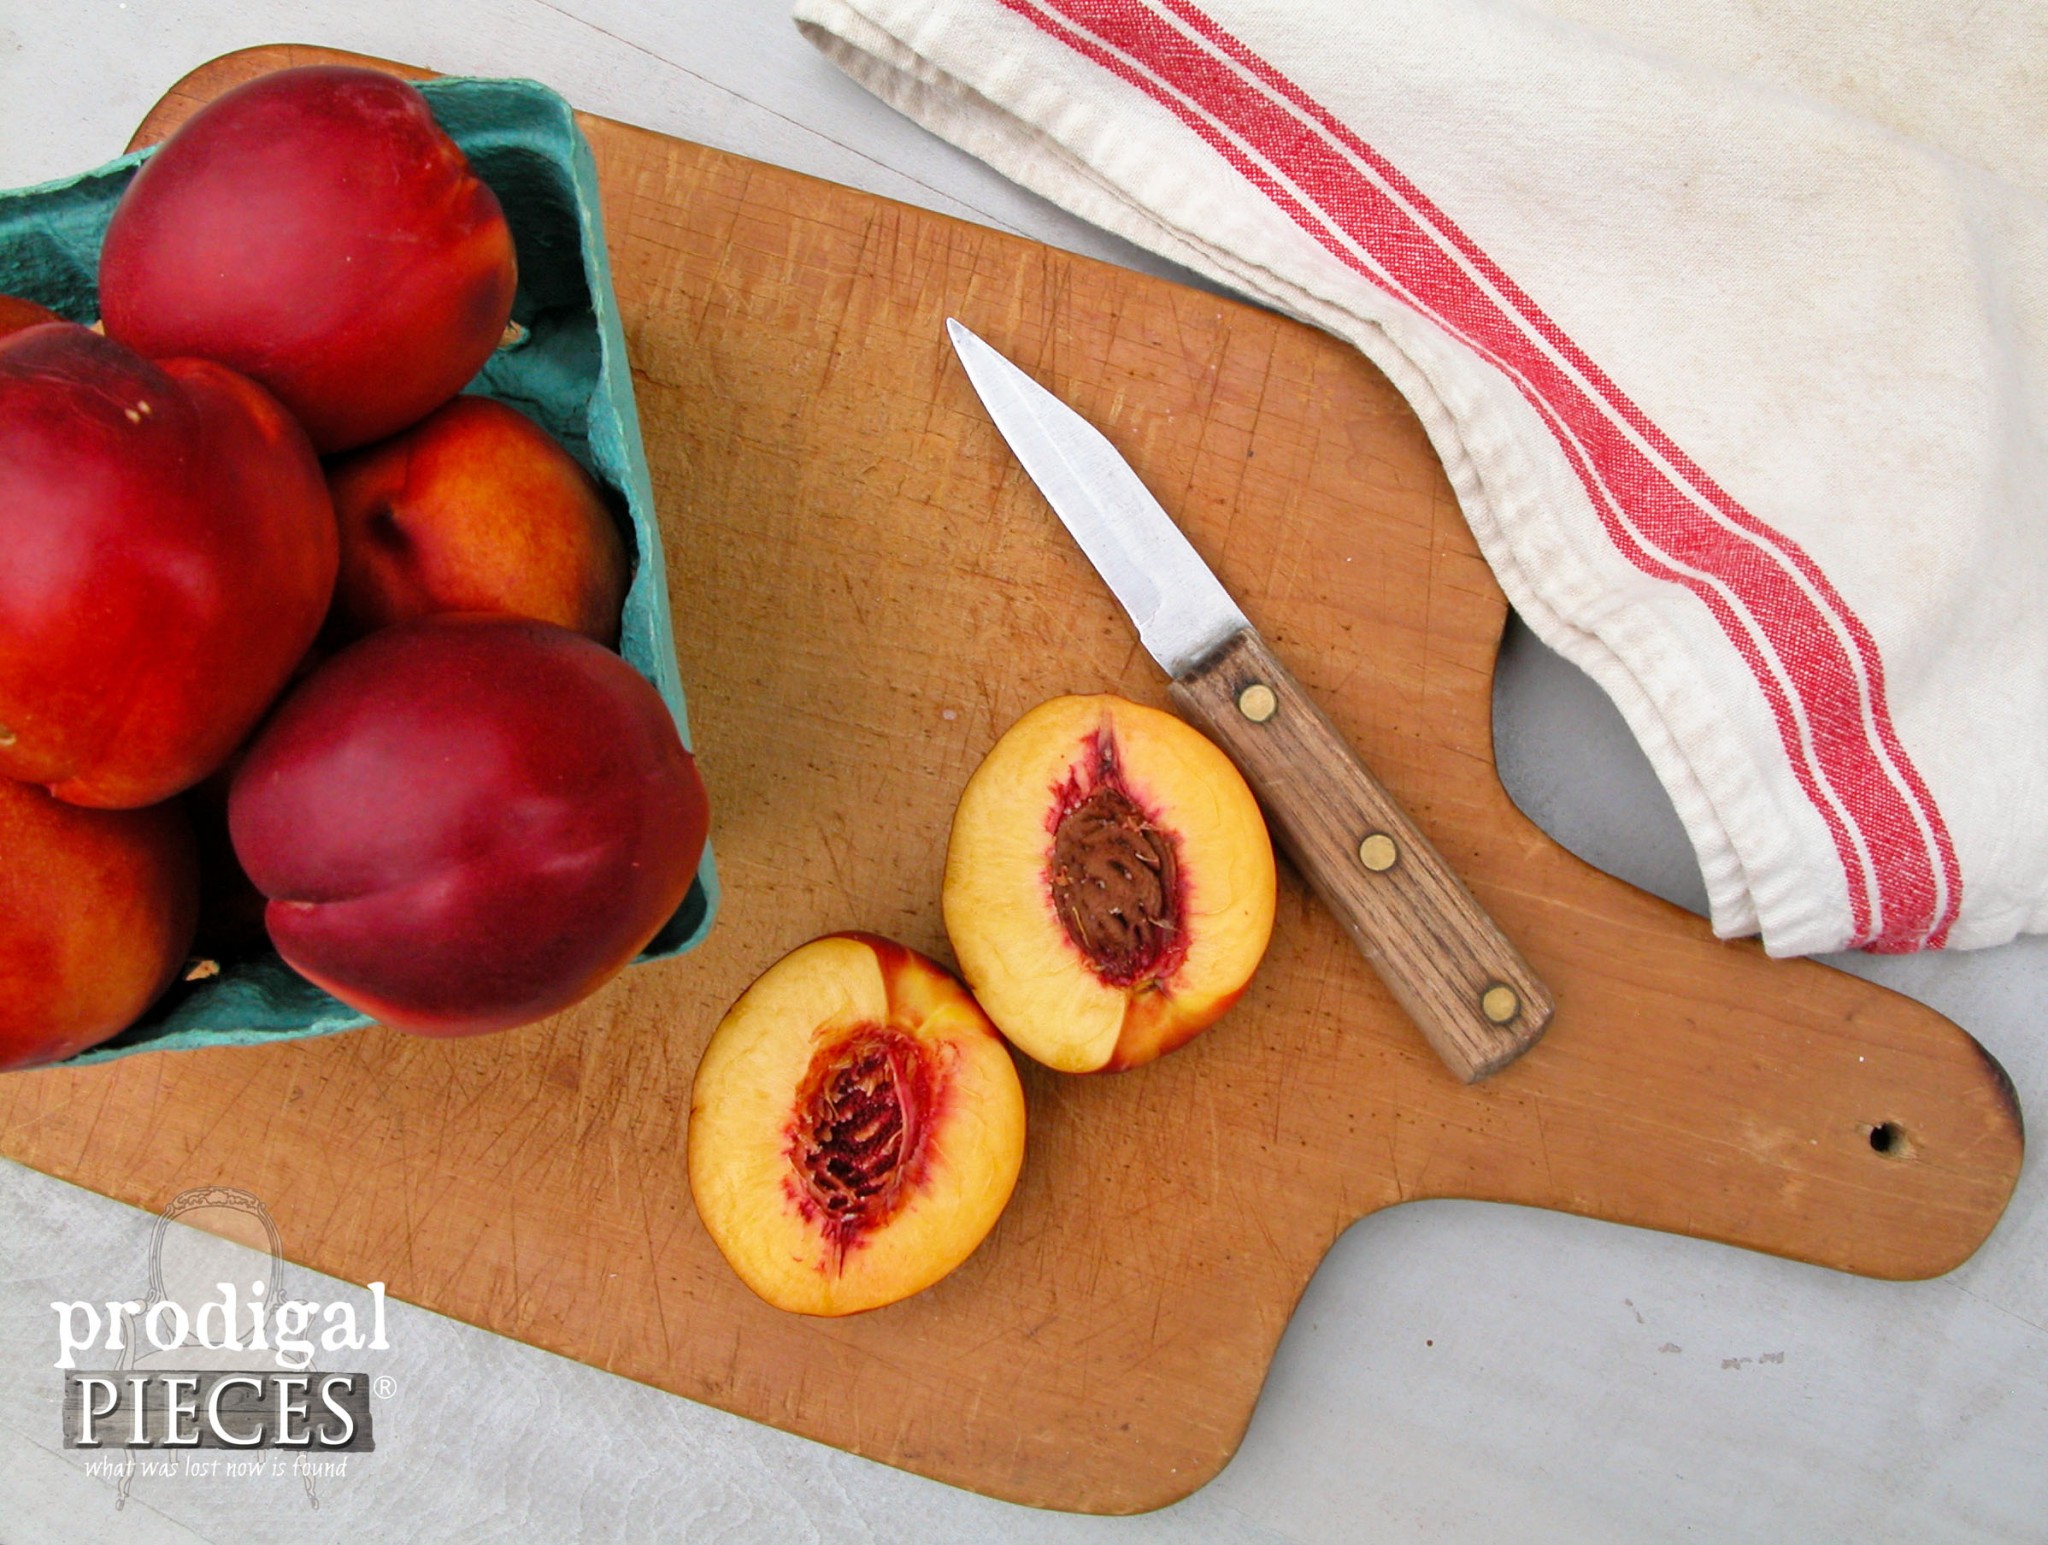 Selection of Fresh Sliced Nectarines for Roasted Stone Fruit Dessert by Prodigal Pieces | www.prodigalpieces.com